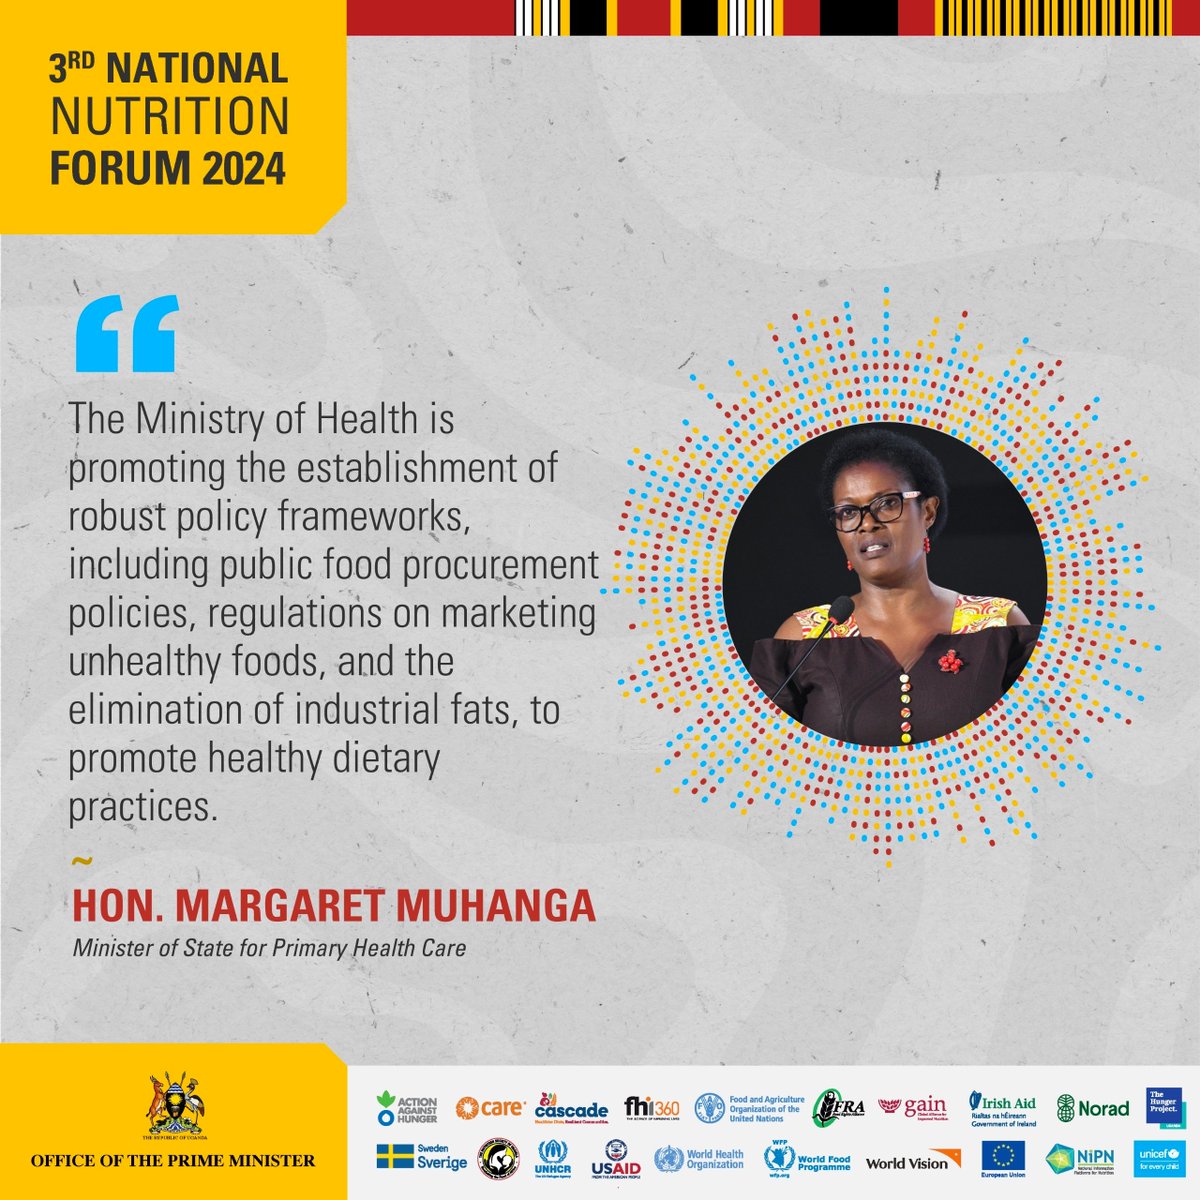 'The @MinofHealthUG is promoting establishment of policy frameworks to promote healthy dietary practices'-@MargaretMuhanga #NationalNutritionForum2024